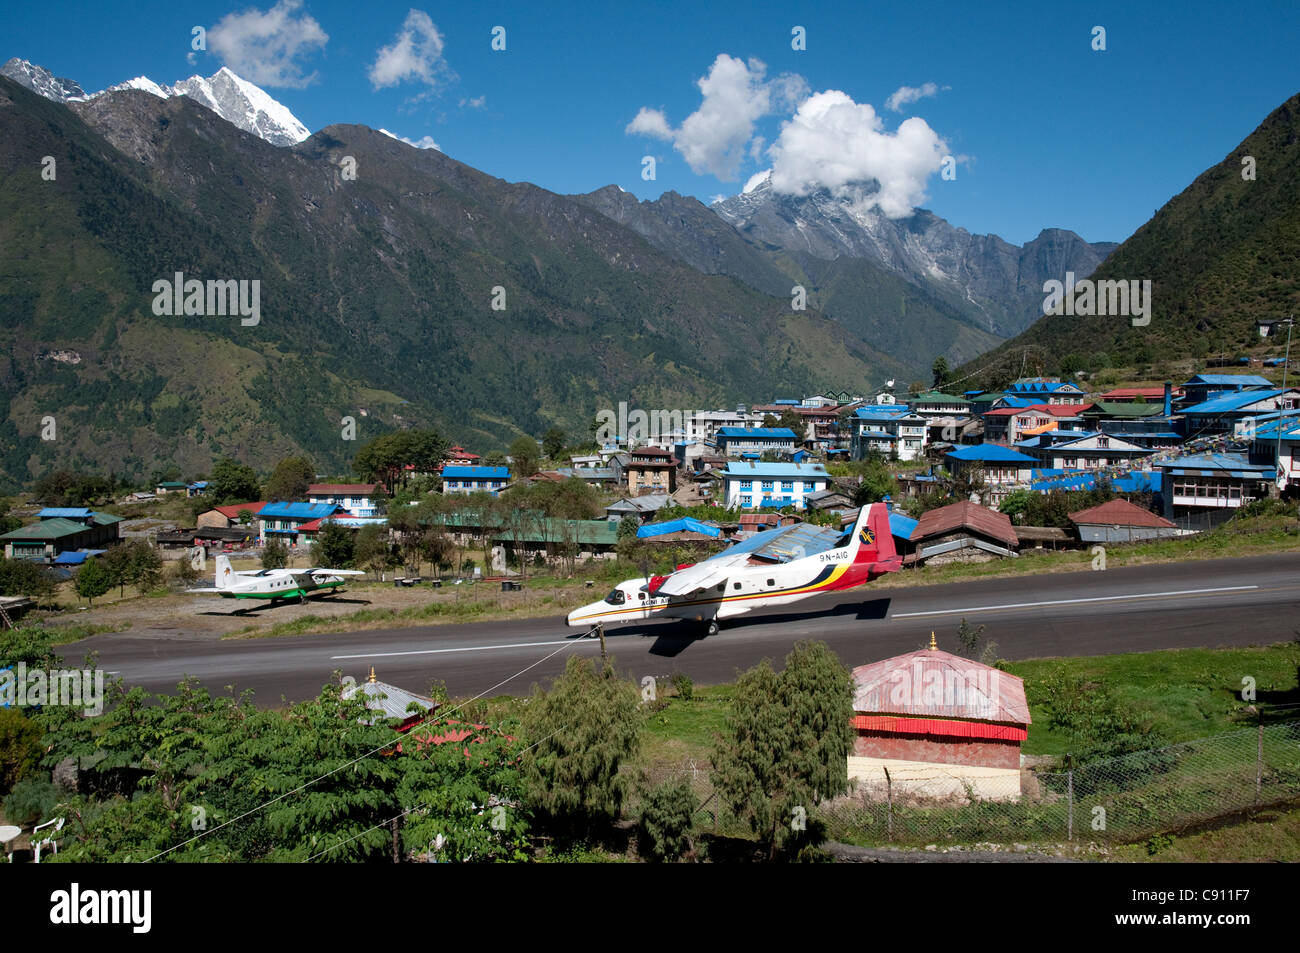 Lukla airfield is the arrival point of many of the trekkers and climbers to the mountain regions of Solu Khumbu. Stock Photo